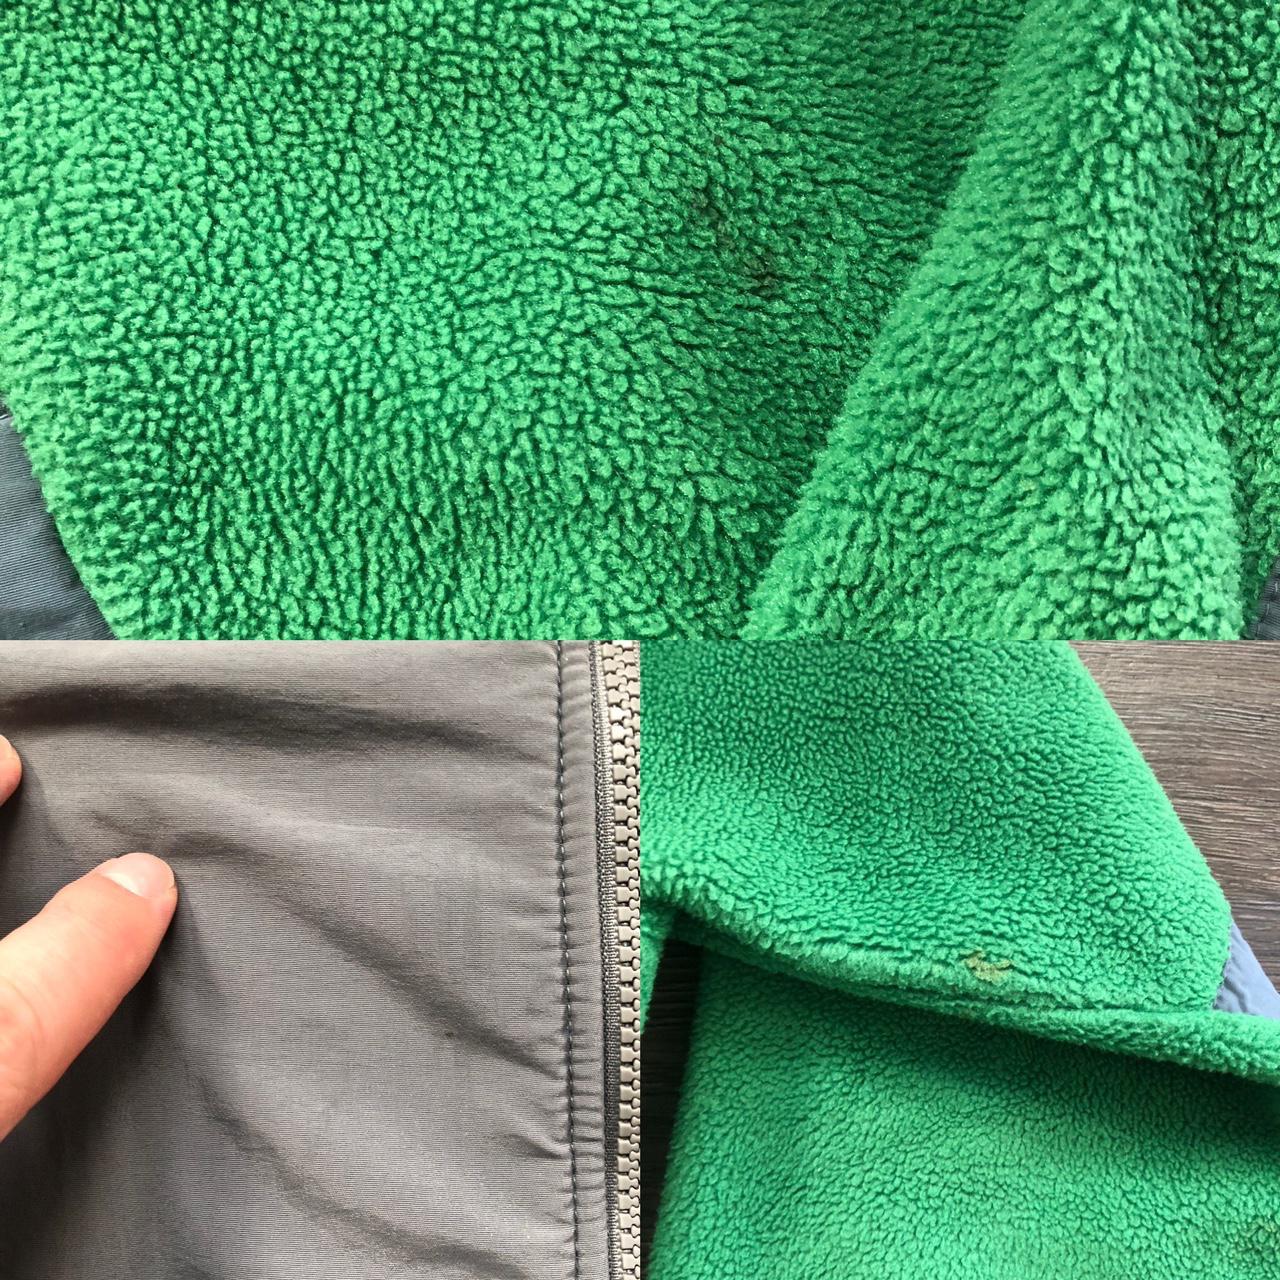 Product Image 4 - 🔥🌨WOMENS NORTH FACE JACKET🌨🔥
-Green and